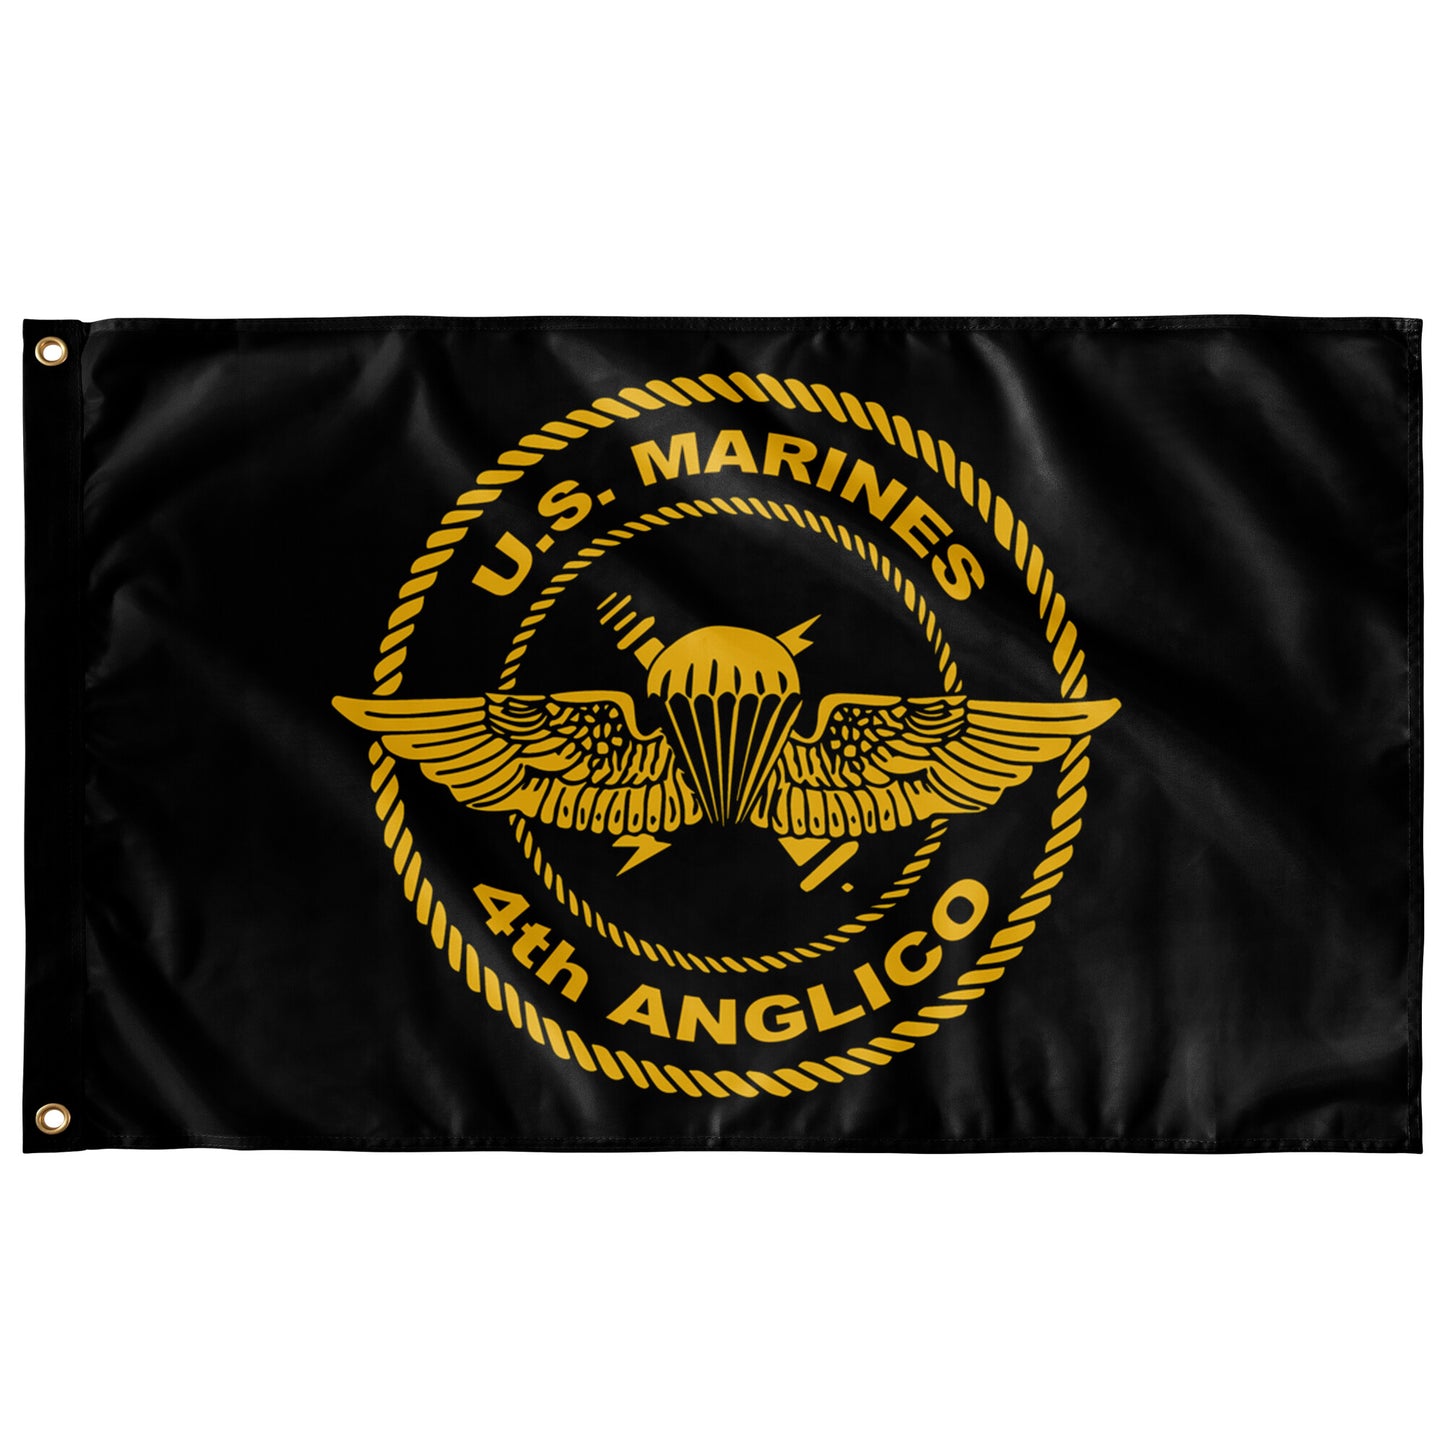 Black 4th ANGLICO Crest Flag